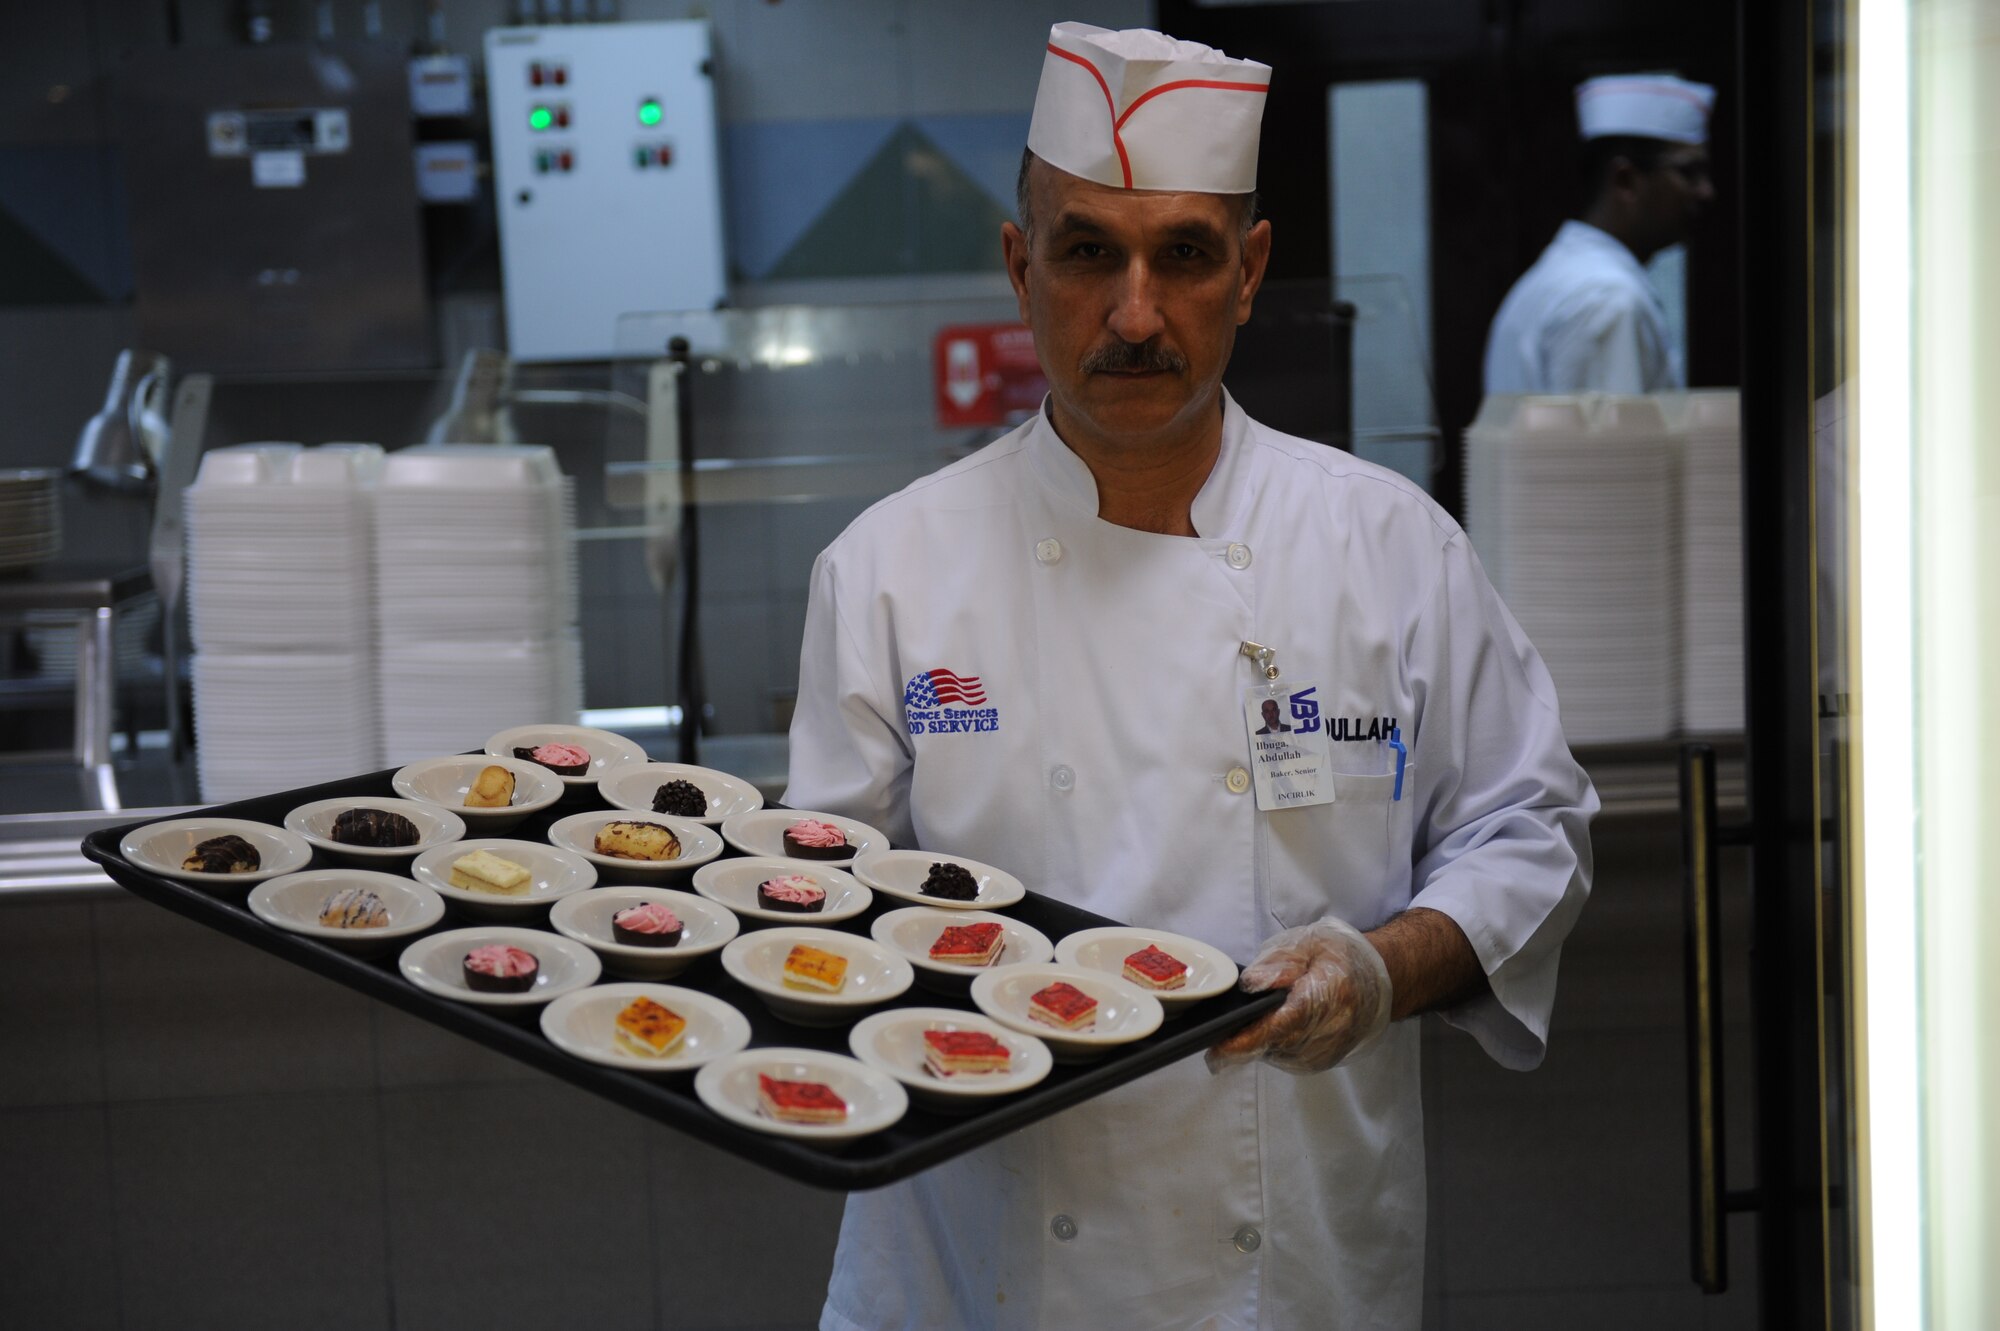 Abdullah Ilbuga, 39th Force Support Squadron senior baker, puts desserts away in preparation for lunch July 27, 2012,  at the Sultan's Inn Dining Facility at Incirlik Air Base, Turkey. The dining facility has received the John L. Hennessy Award, Single Unit Category, twice in the past three years at the Air Force level. (U.S. Air Force photo by Senior Airman William A. O'Brien/Released) 